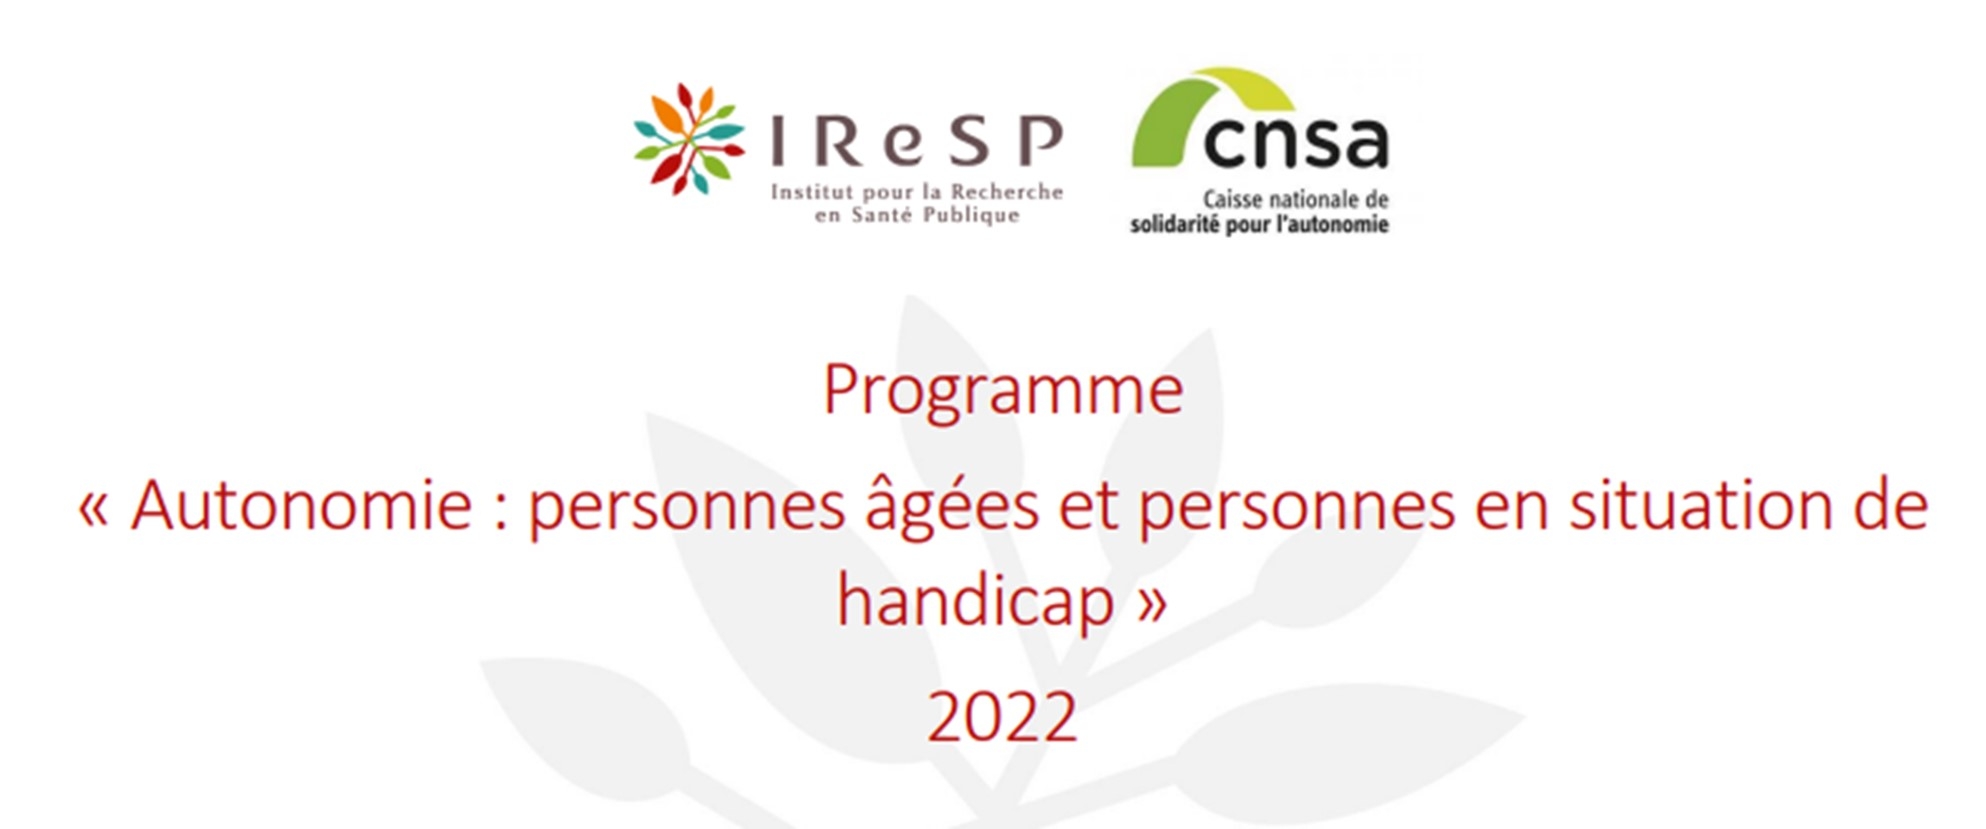 IRESP Call 2022 Health services and transformation of medicosocial offer